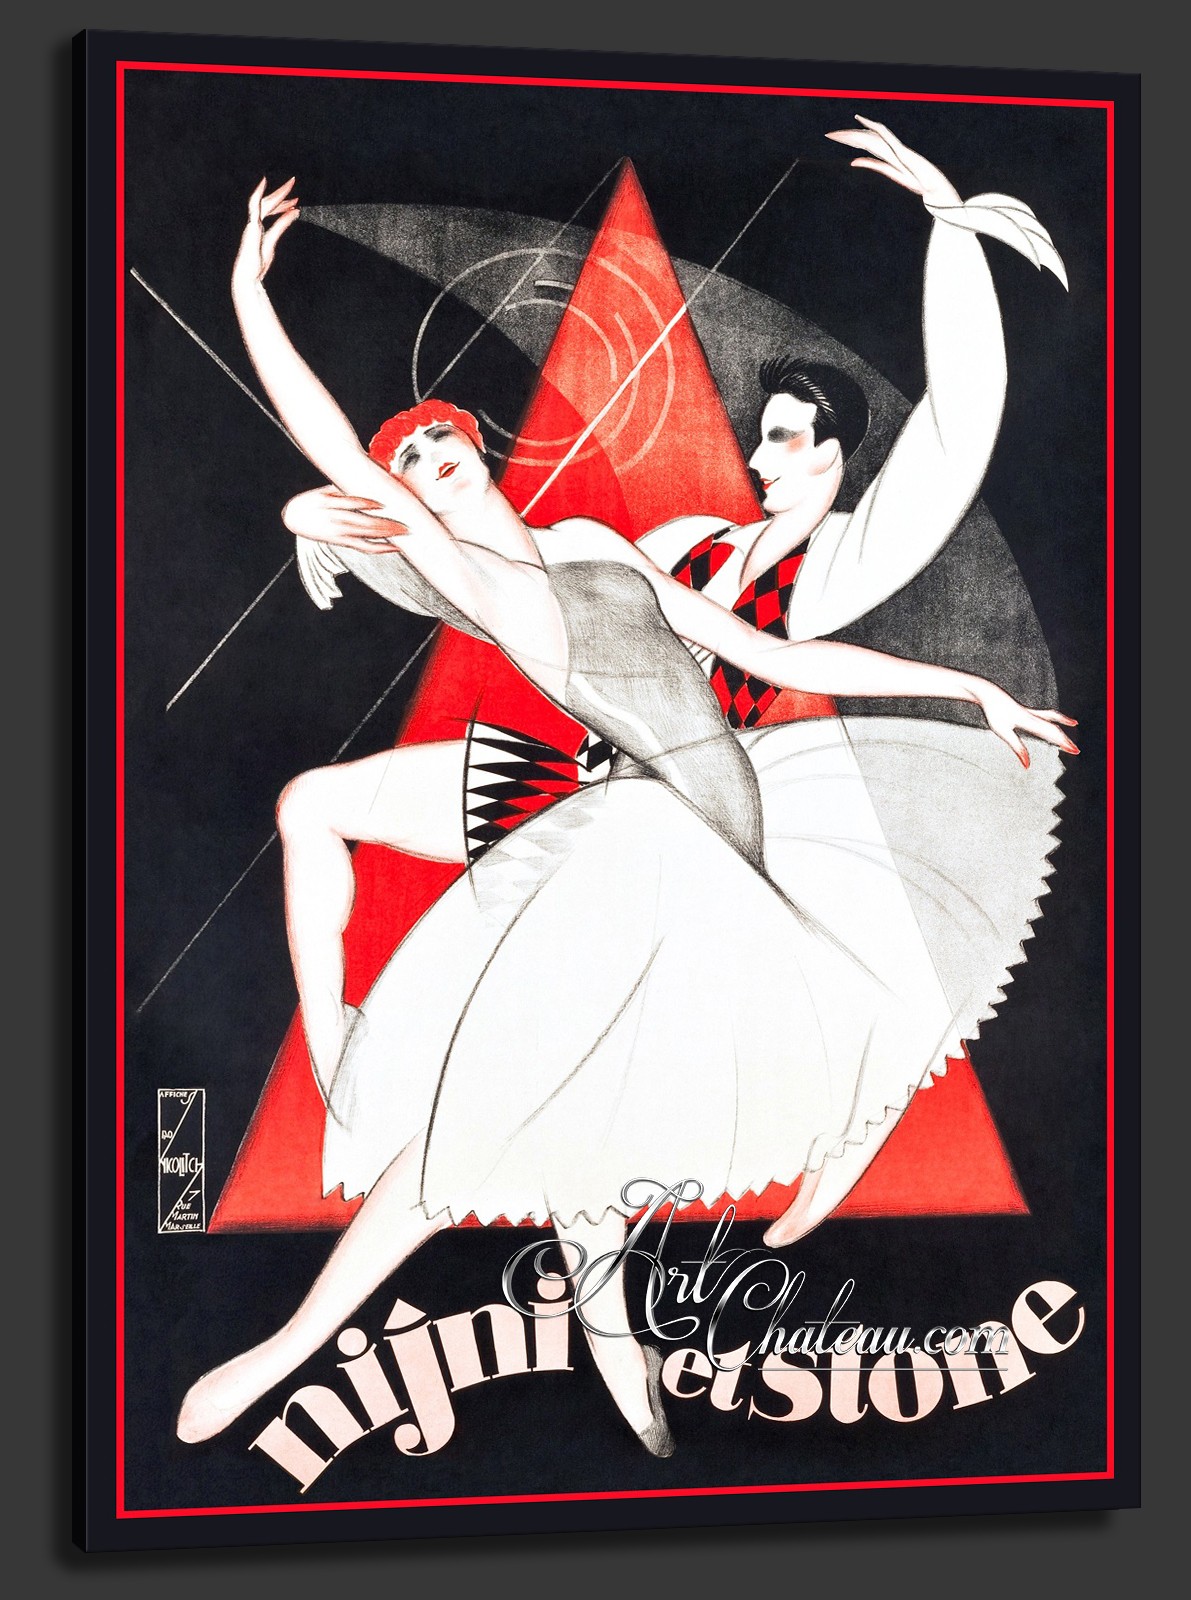 French Ballet Poster, featuring Bentley Stone